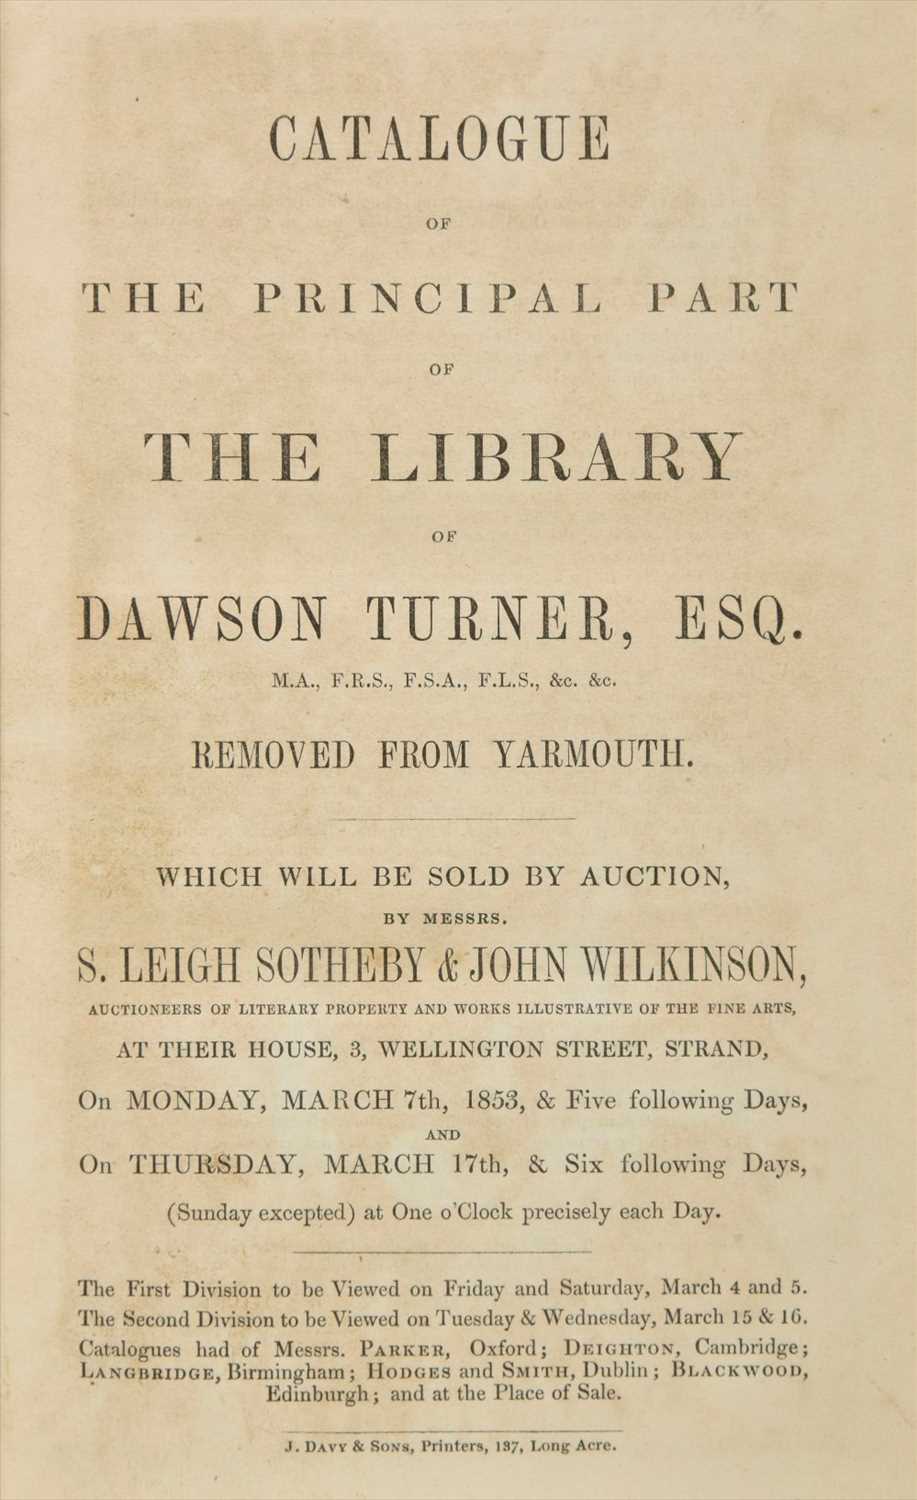 Lot 313 - Turner (Dawson). Catalogue of the Principal Part of the Library of Dawson Turner, 1853